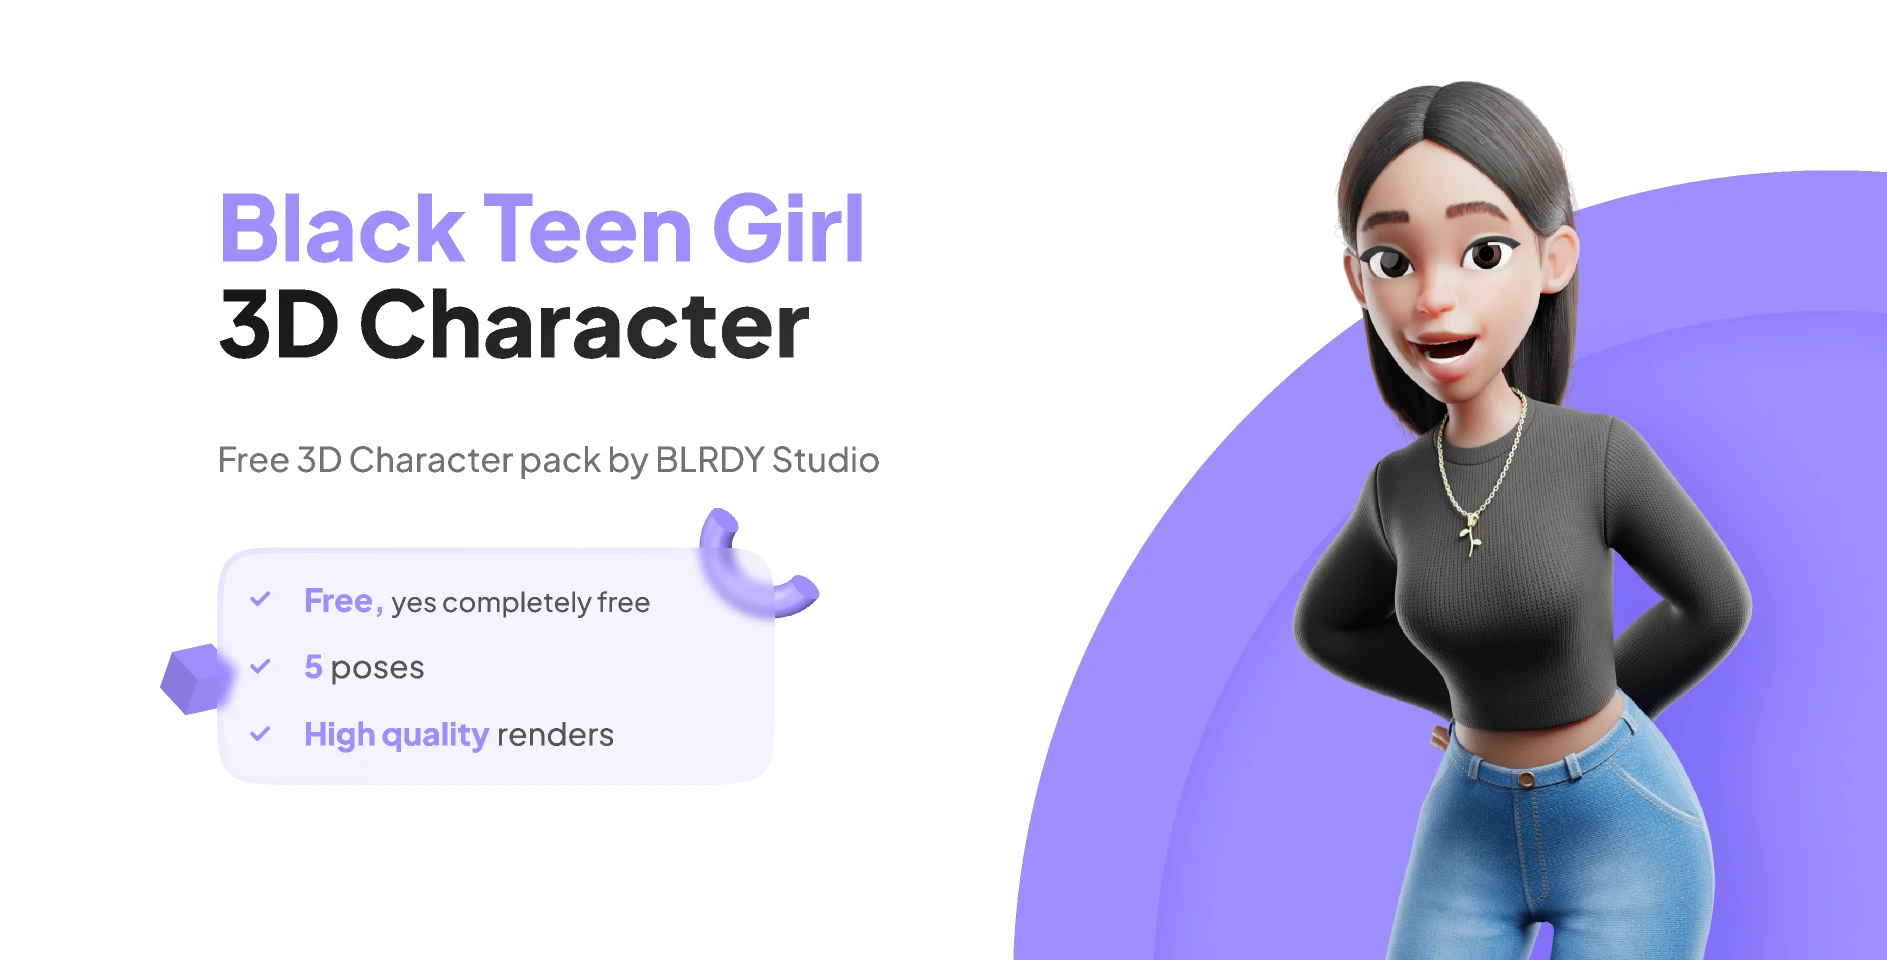 Black Teen Girl 3D Character for Figma and Adobe XD